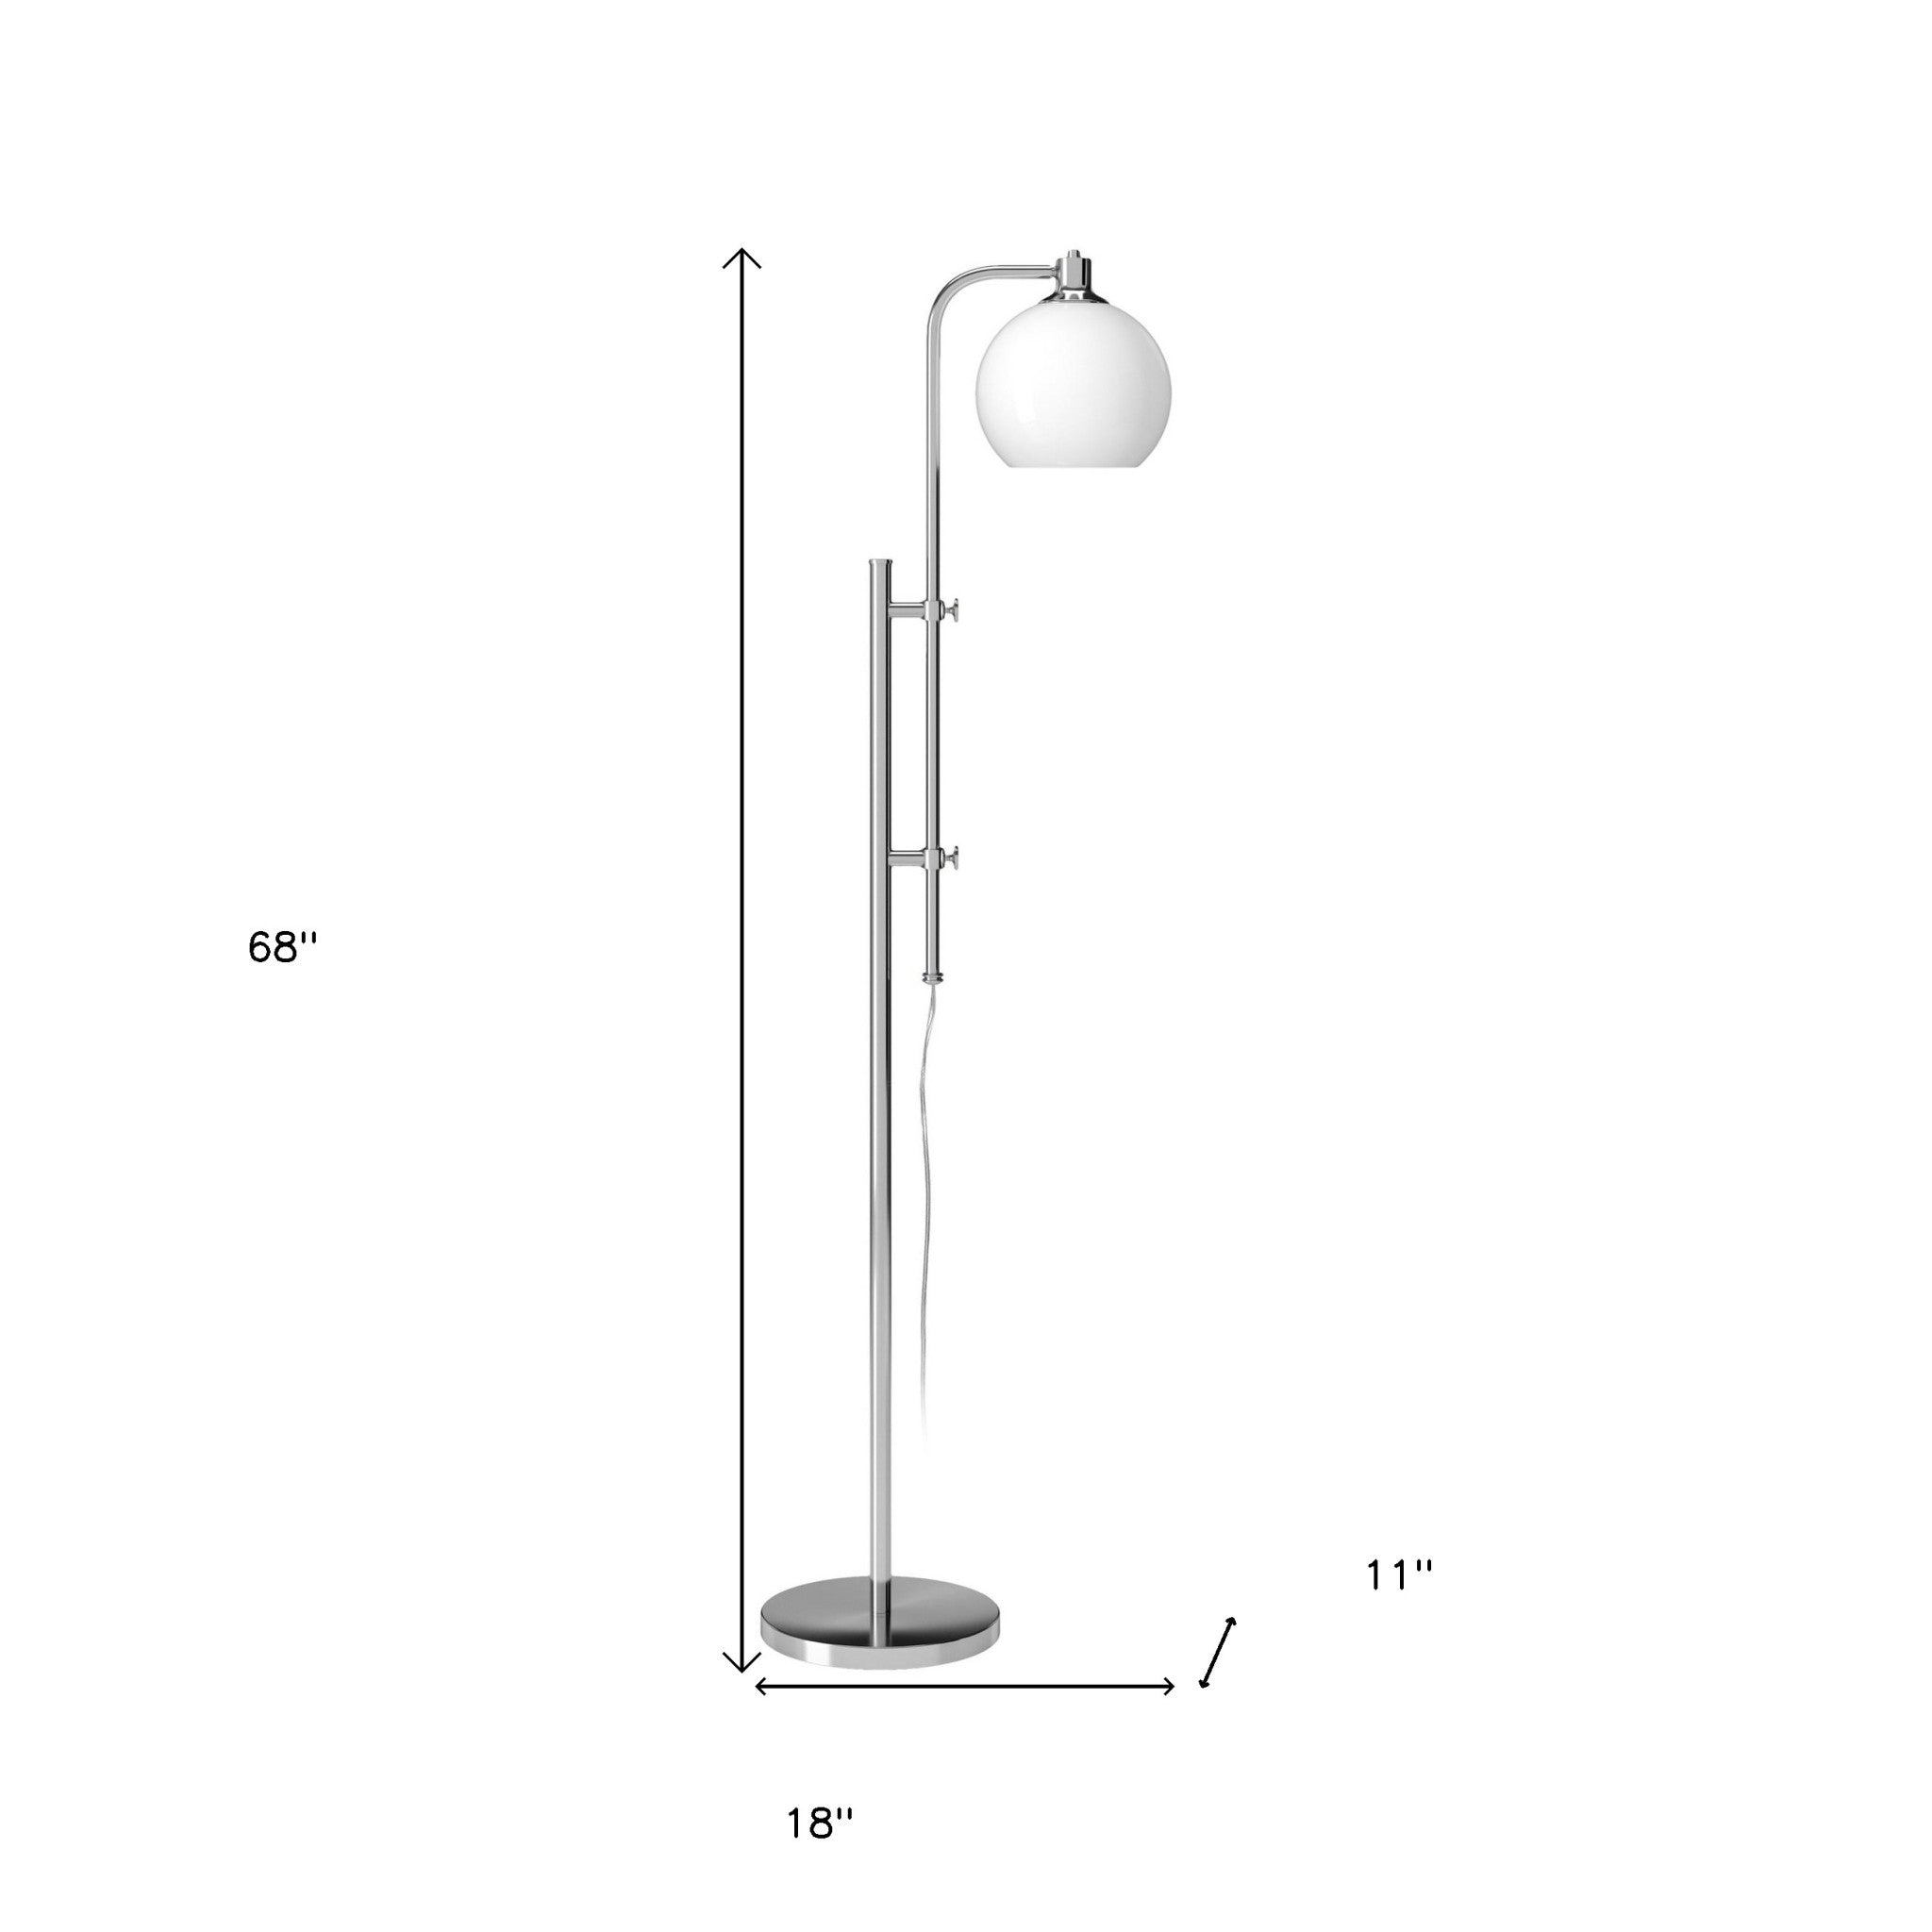 68" Nickel Adjustable Reading Floor Lamp With White Frosted Glass Globe Shade